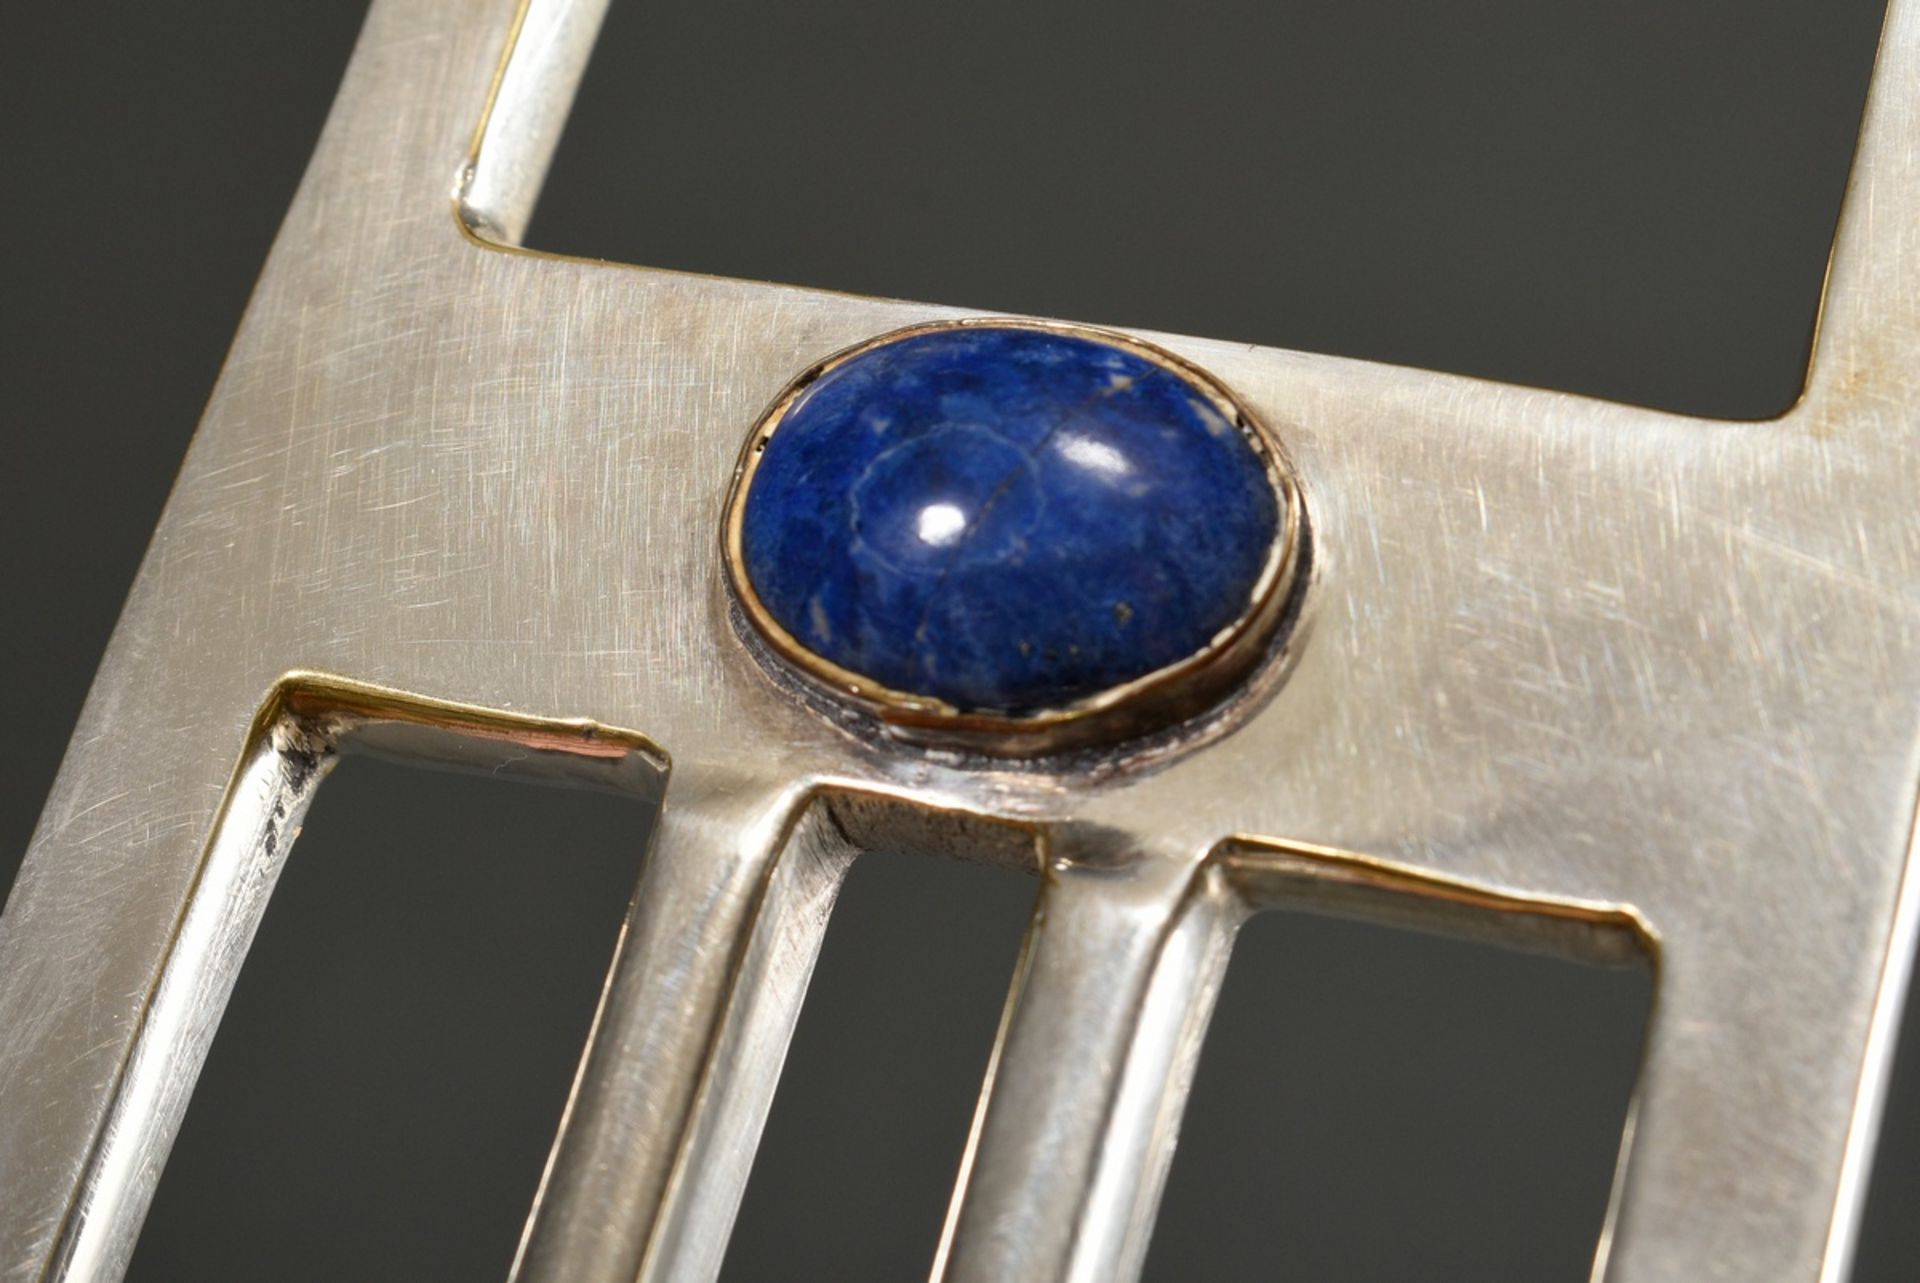 Silver-plated Arts & Crafts girandole in geometric design with lapis lazuli cabochons between the a - Image 3 of 5